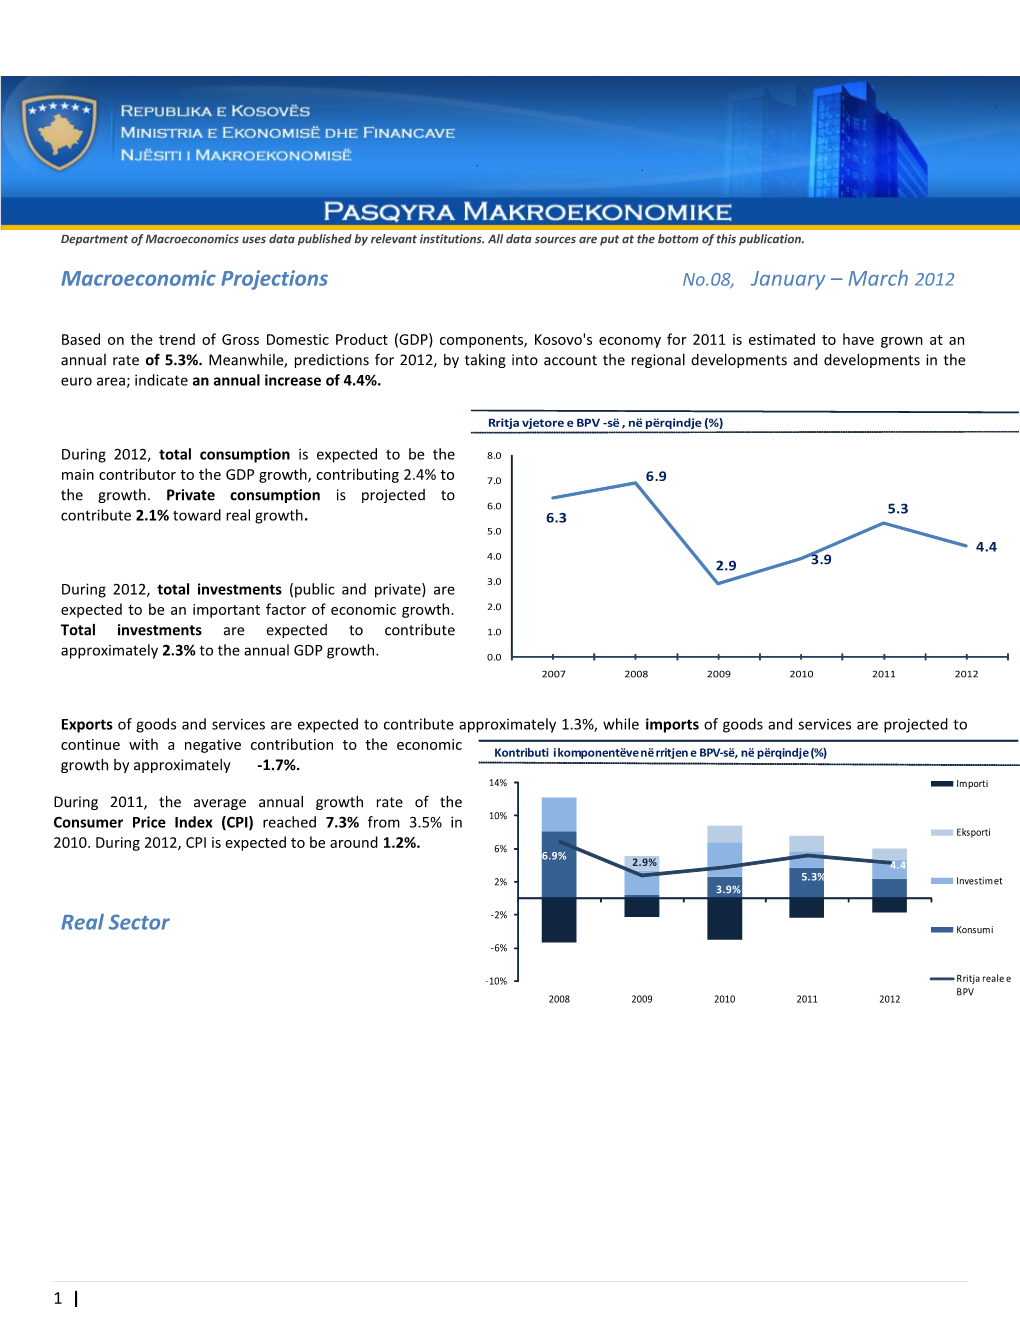 Macroeconomic Projections No.08, January March 2012